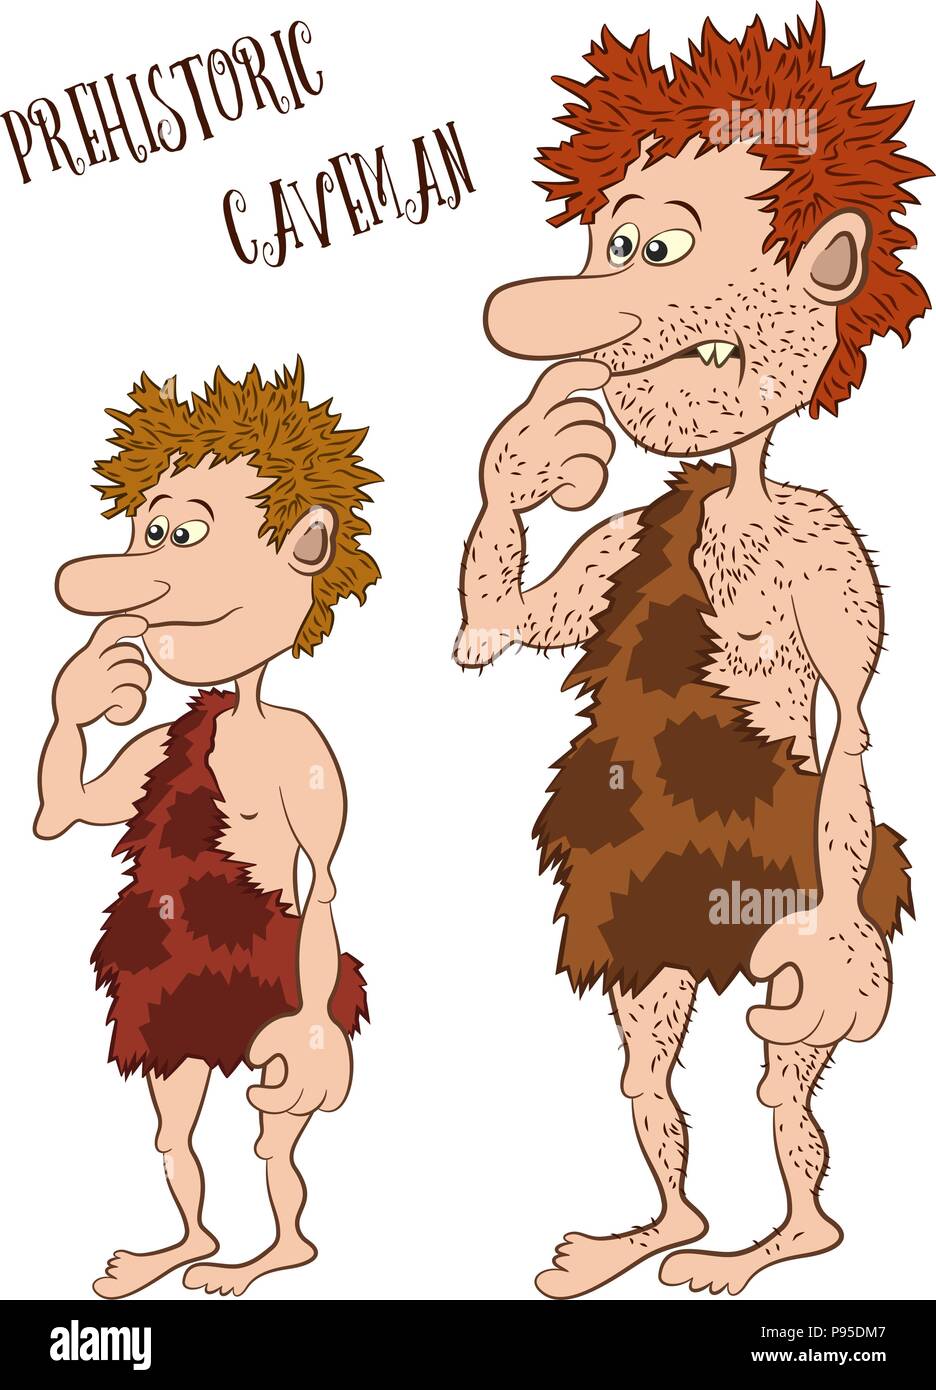 Cartoon Characters, Man and Boy, Father and Son, Prehistoric Caveman in Animal Skin, Isolated on White Background. Vector Stock Vector